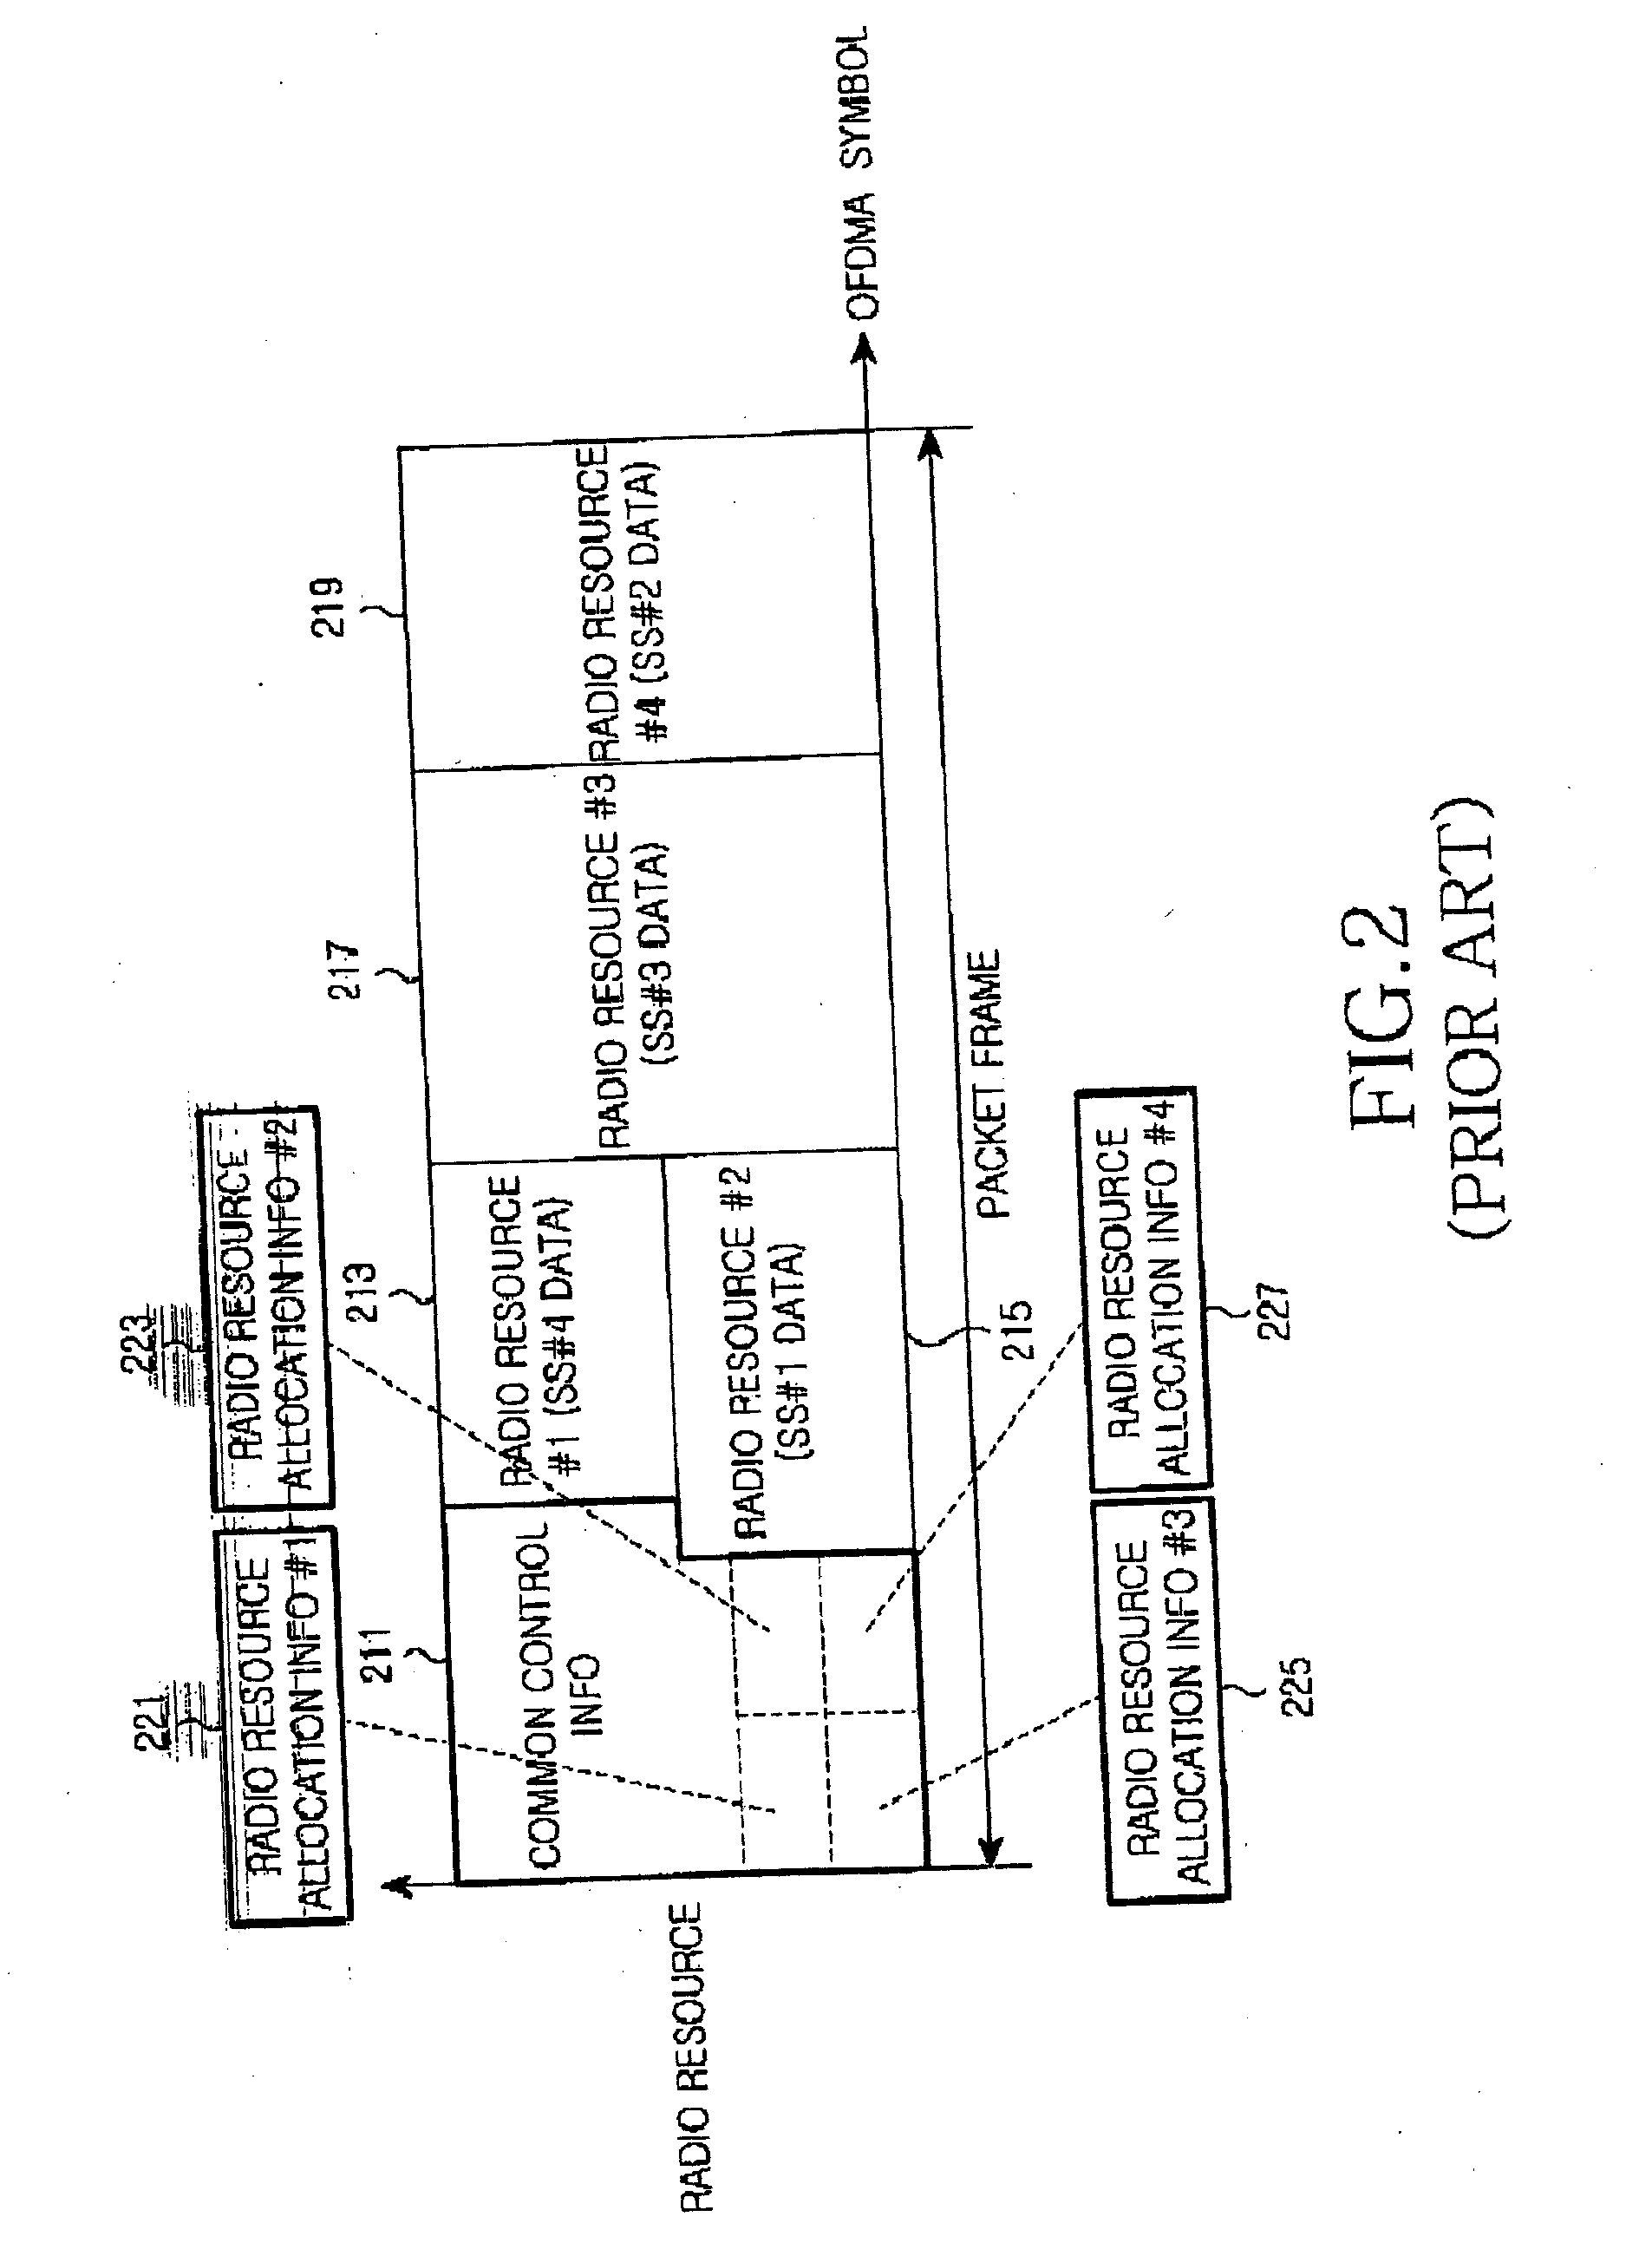 Apparatus and method for transmitting and receiving commmon control information in a wireless communication system